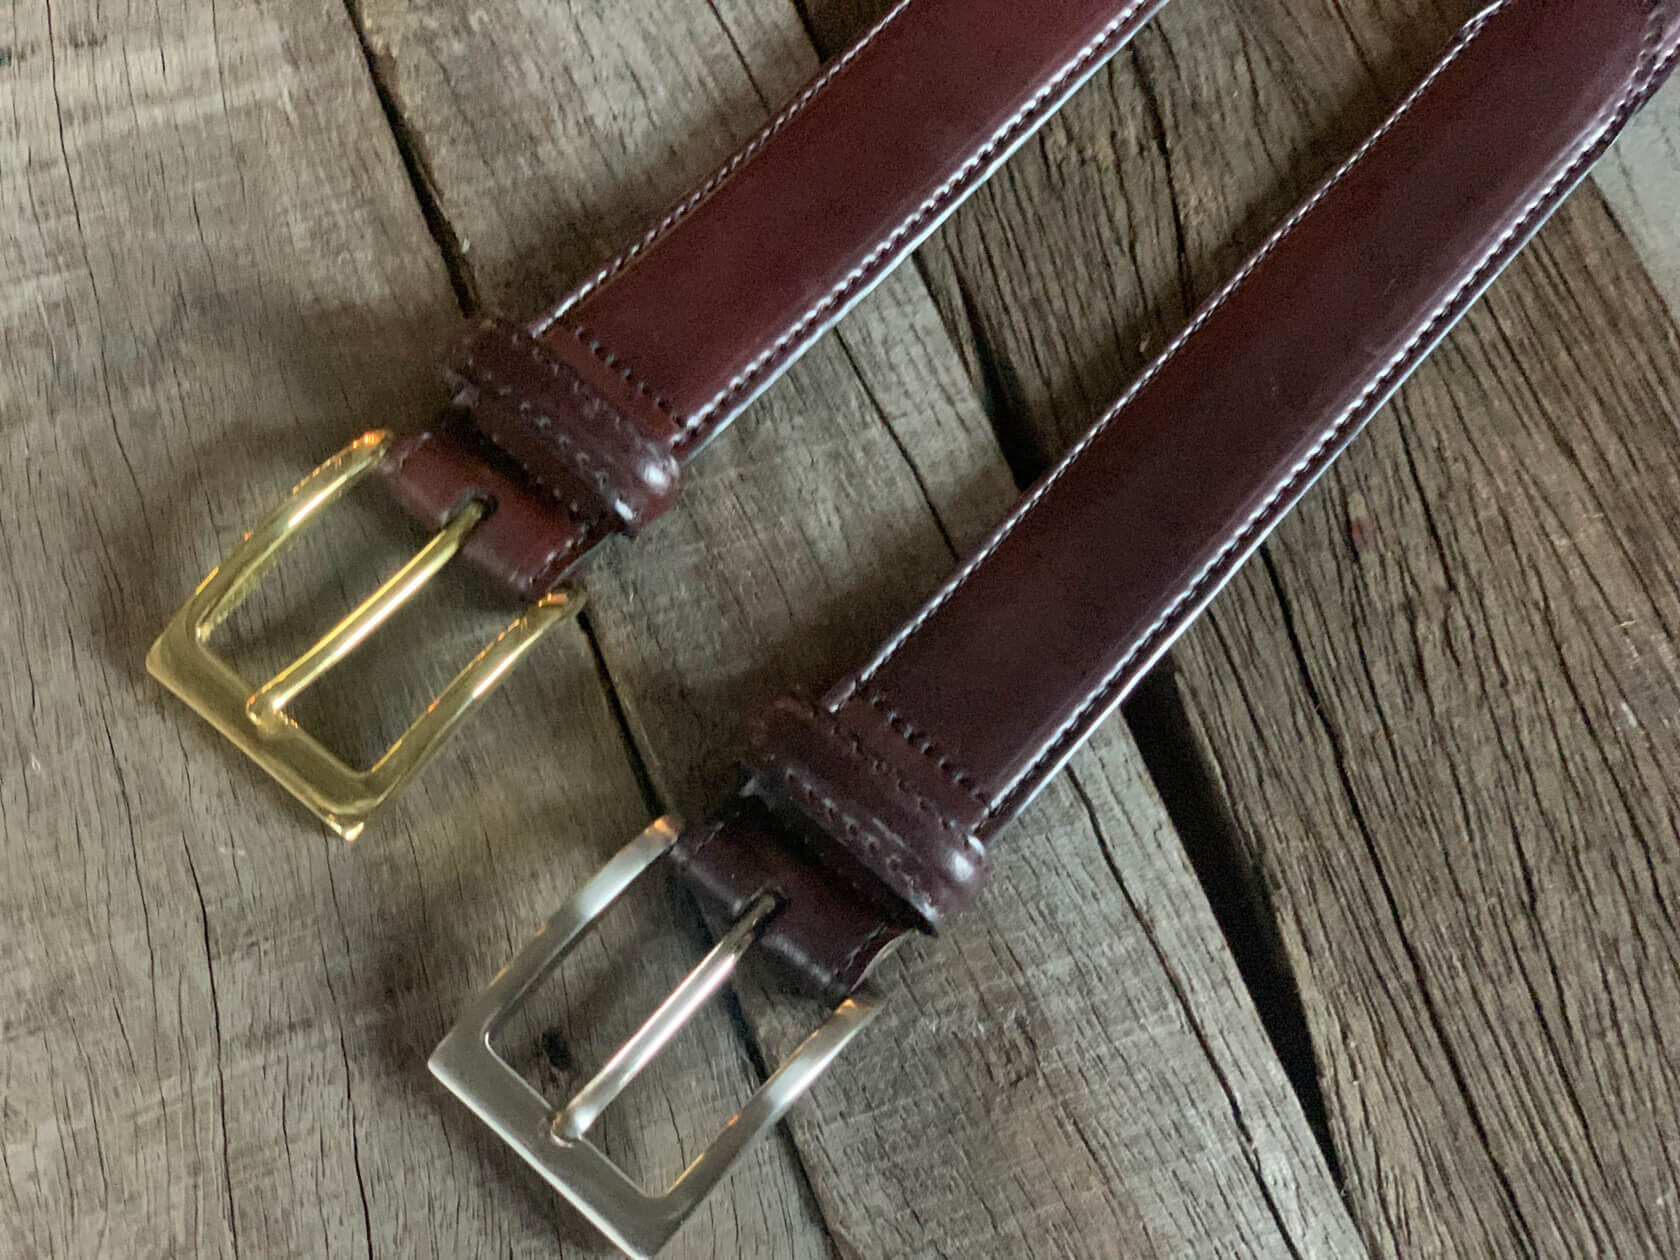 Cordovan Belts | The Tannery Row | Leather Distributor